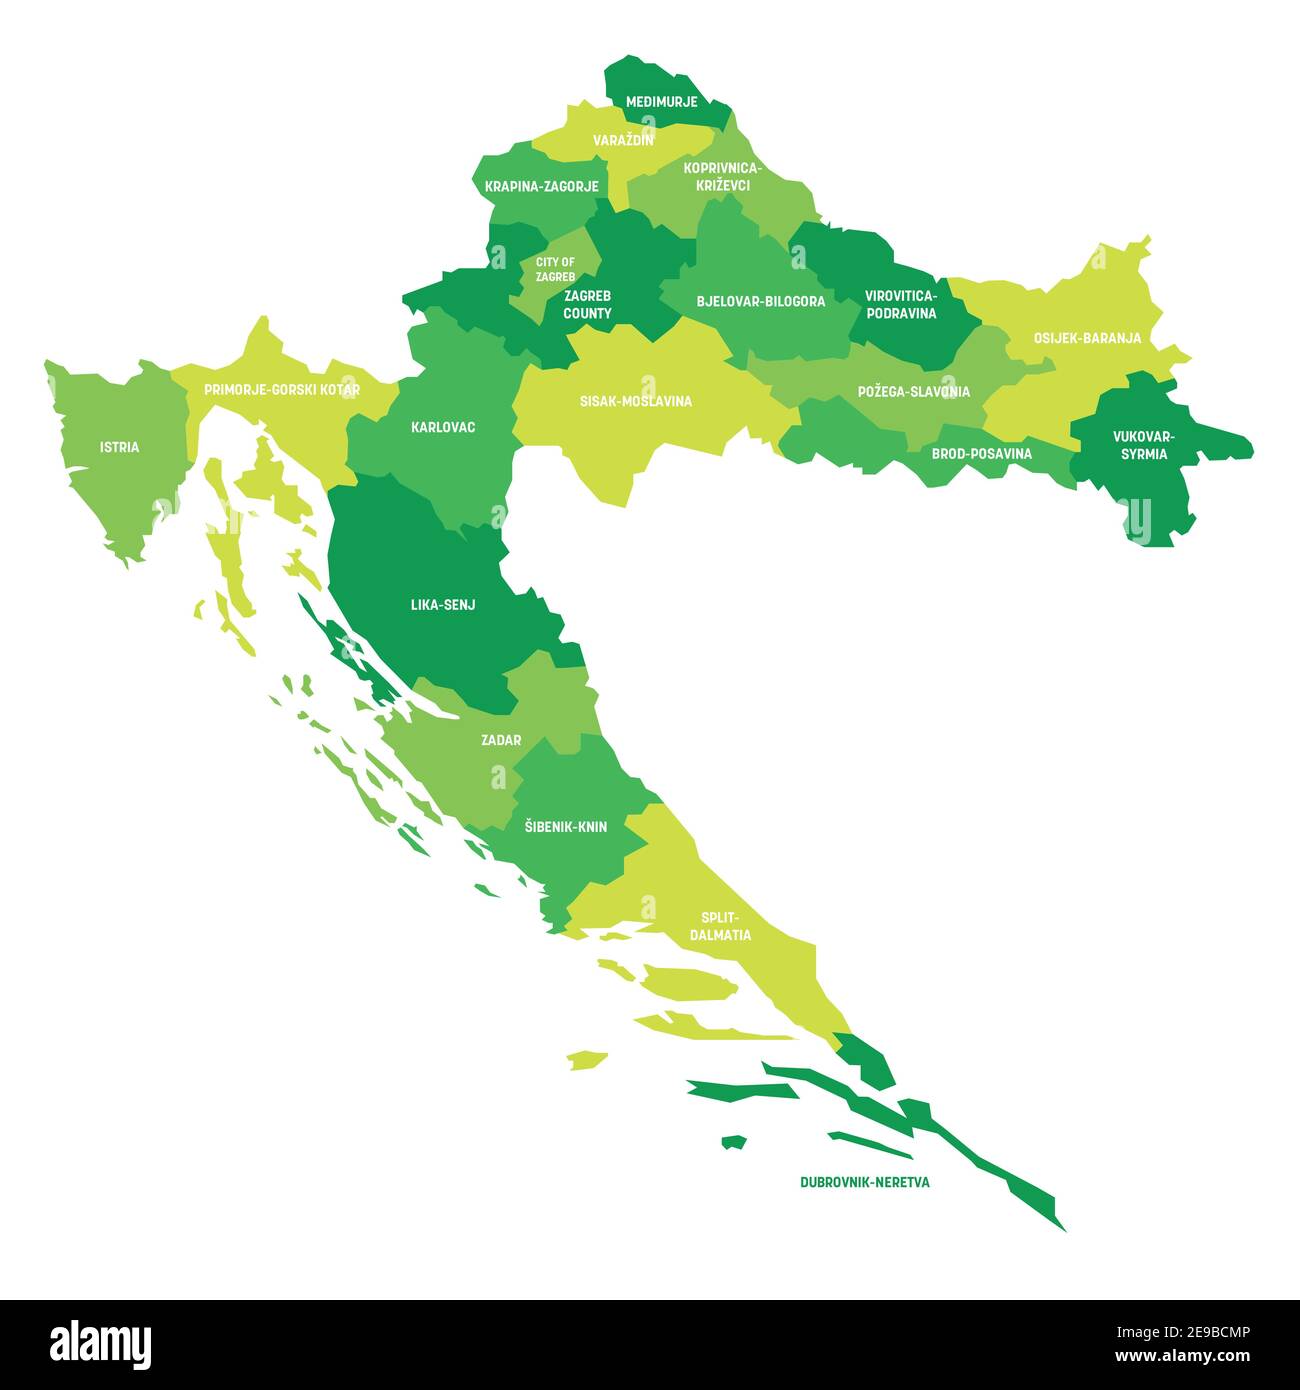 Green political map of Croatia. Administrative divisions - counties. Simple flat vector map with labels. Stock Vector